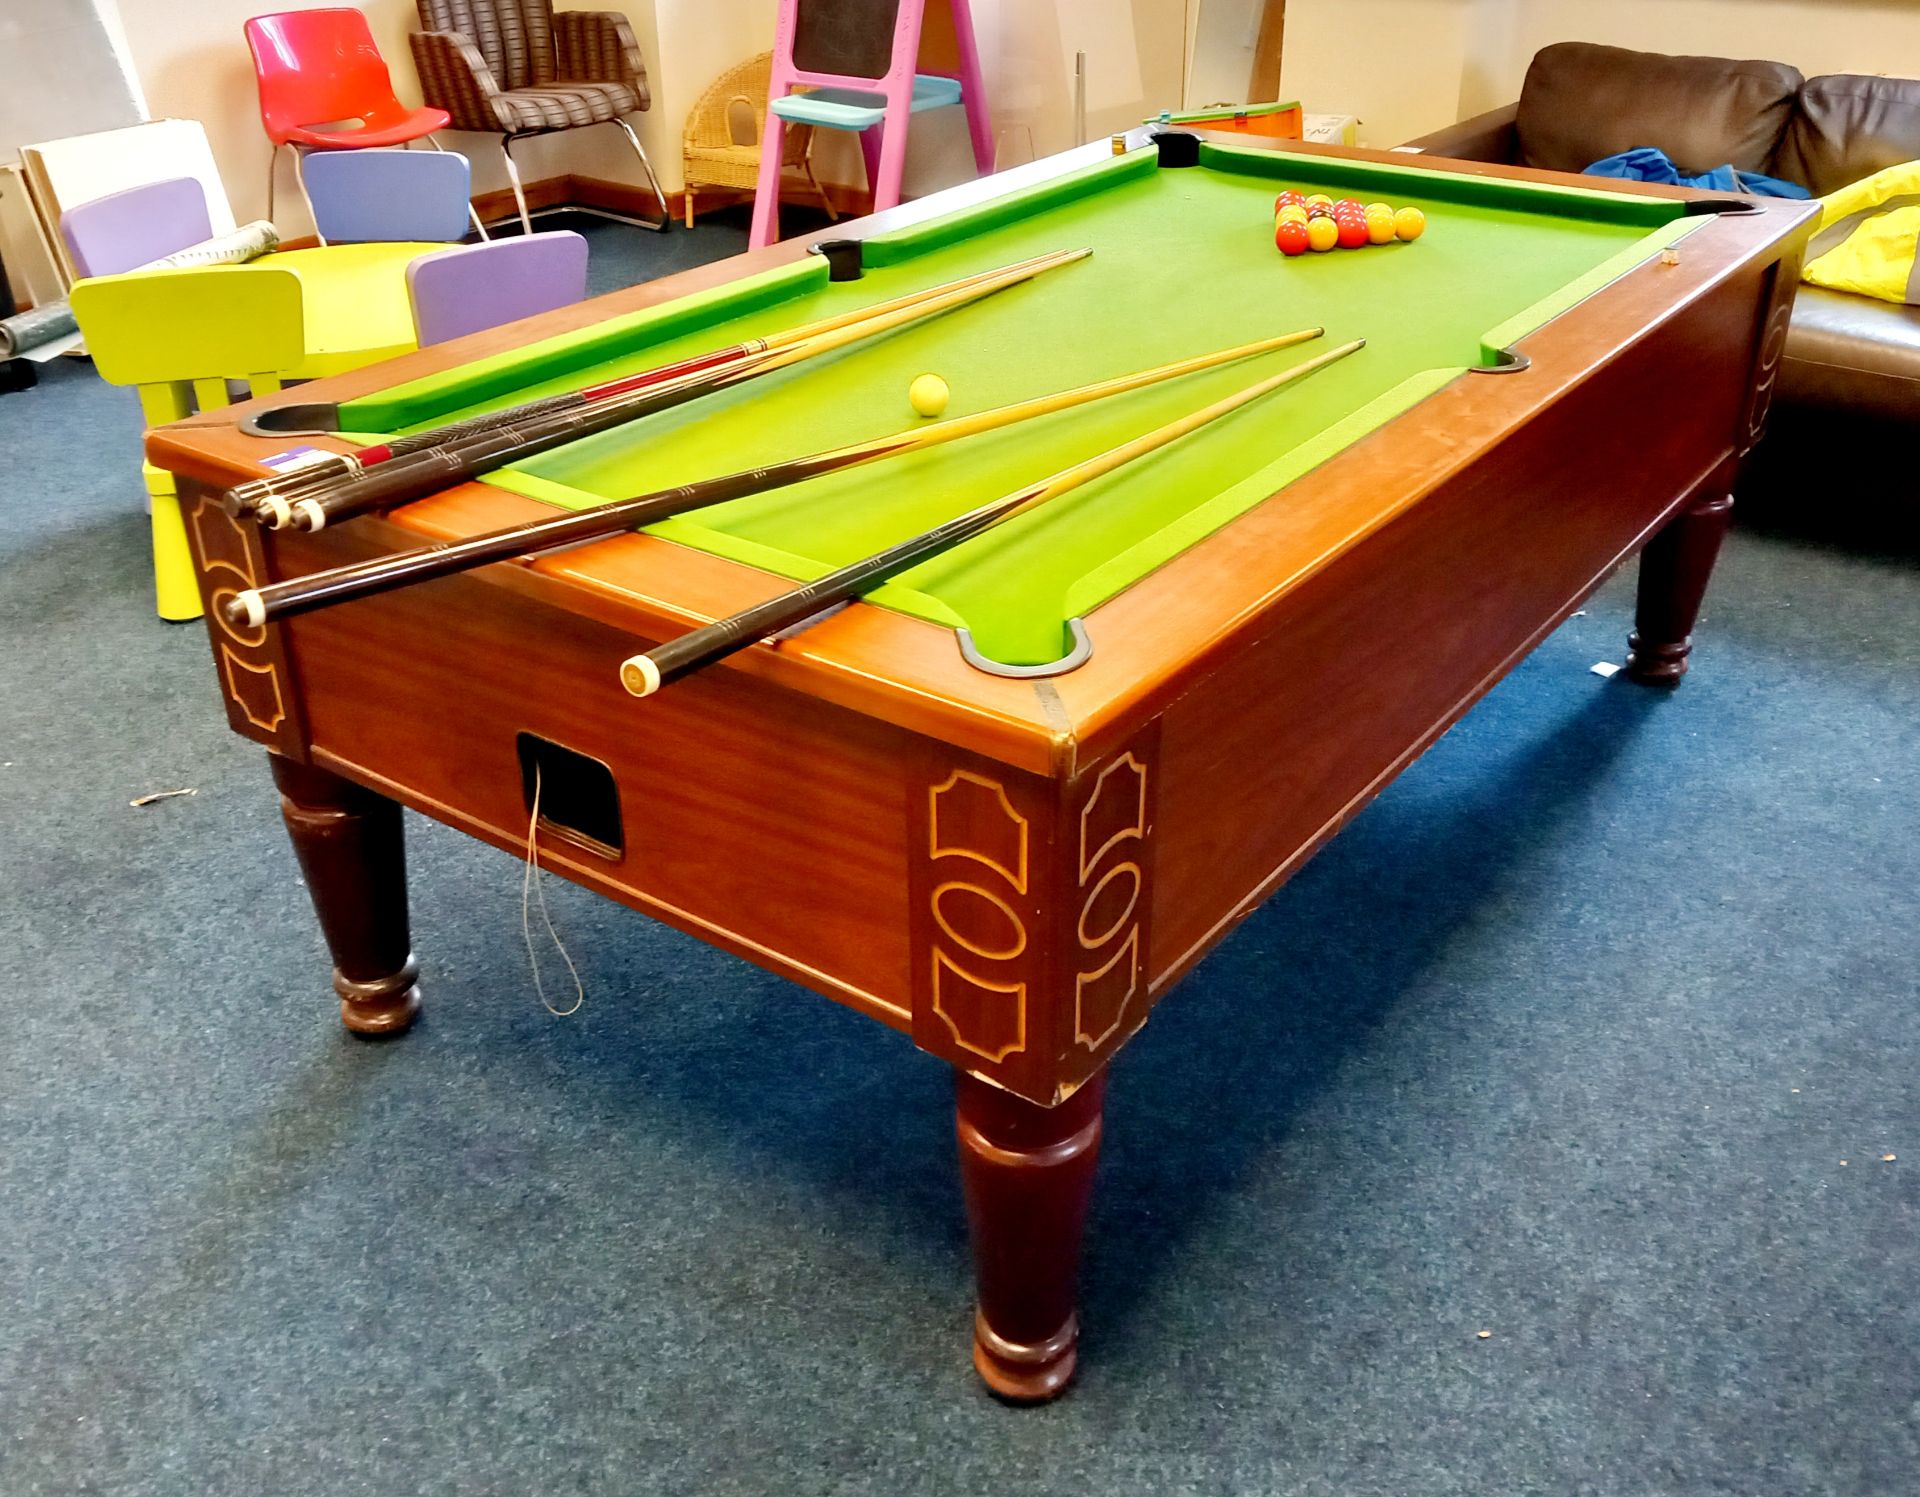 Ascot slate bed pool table (located on first floor) - Image 2 of 2